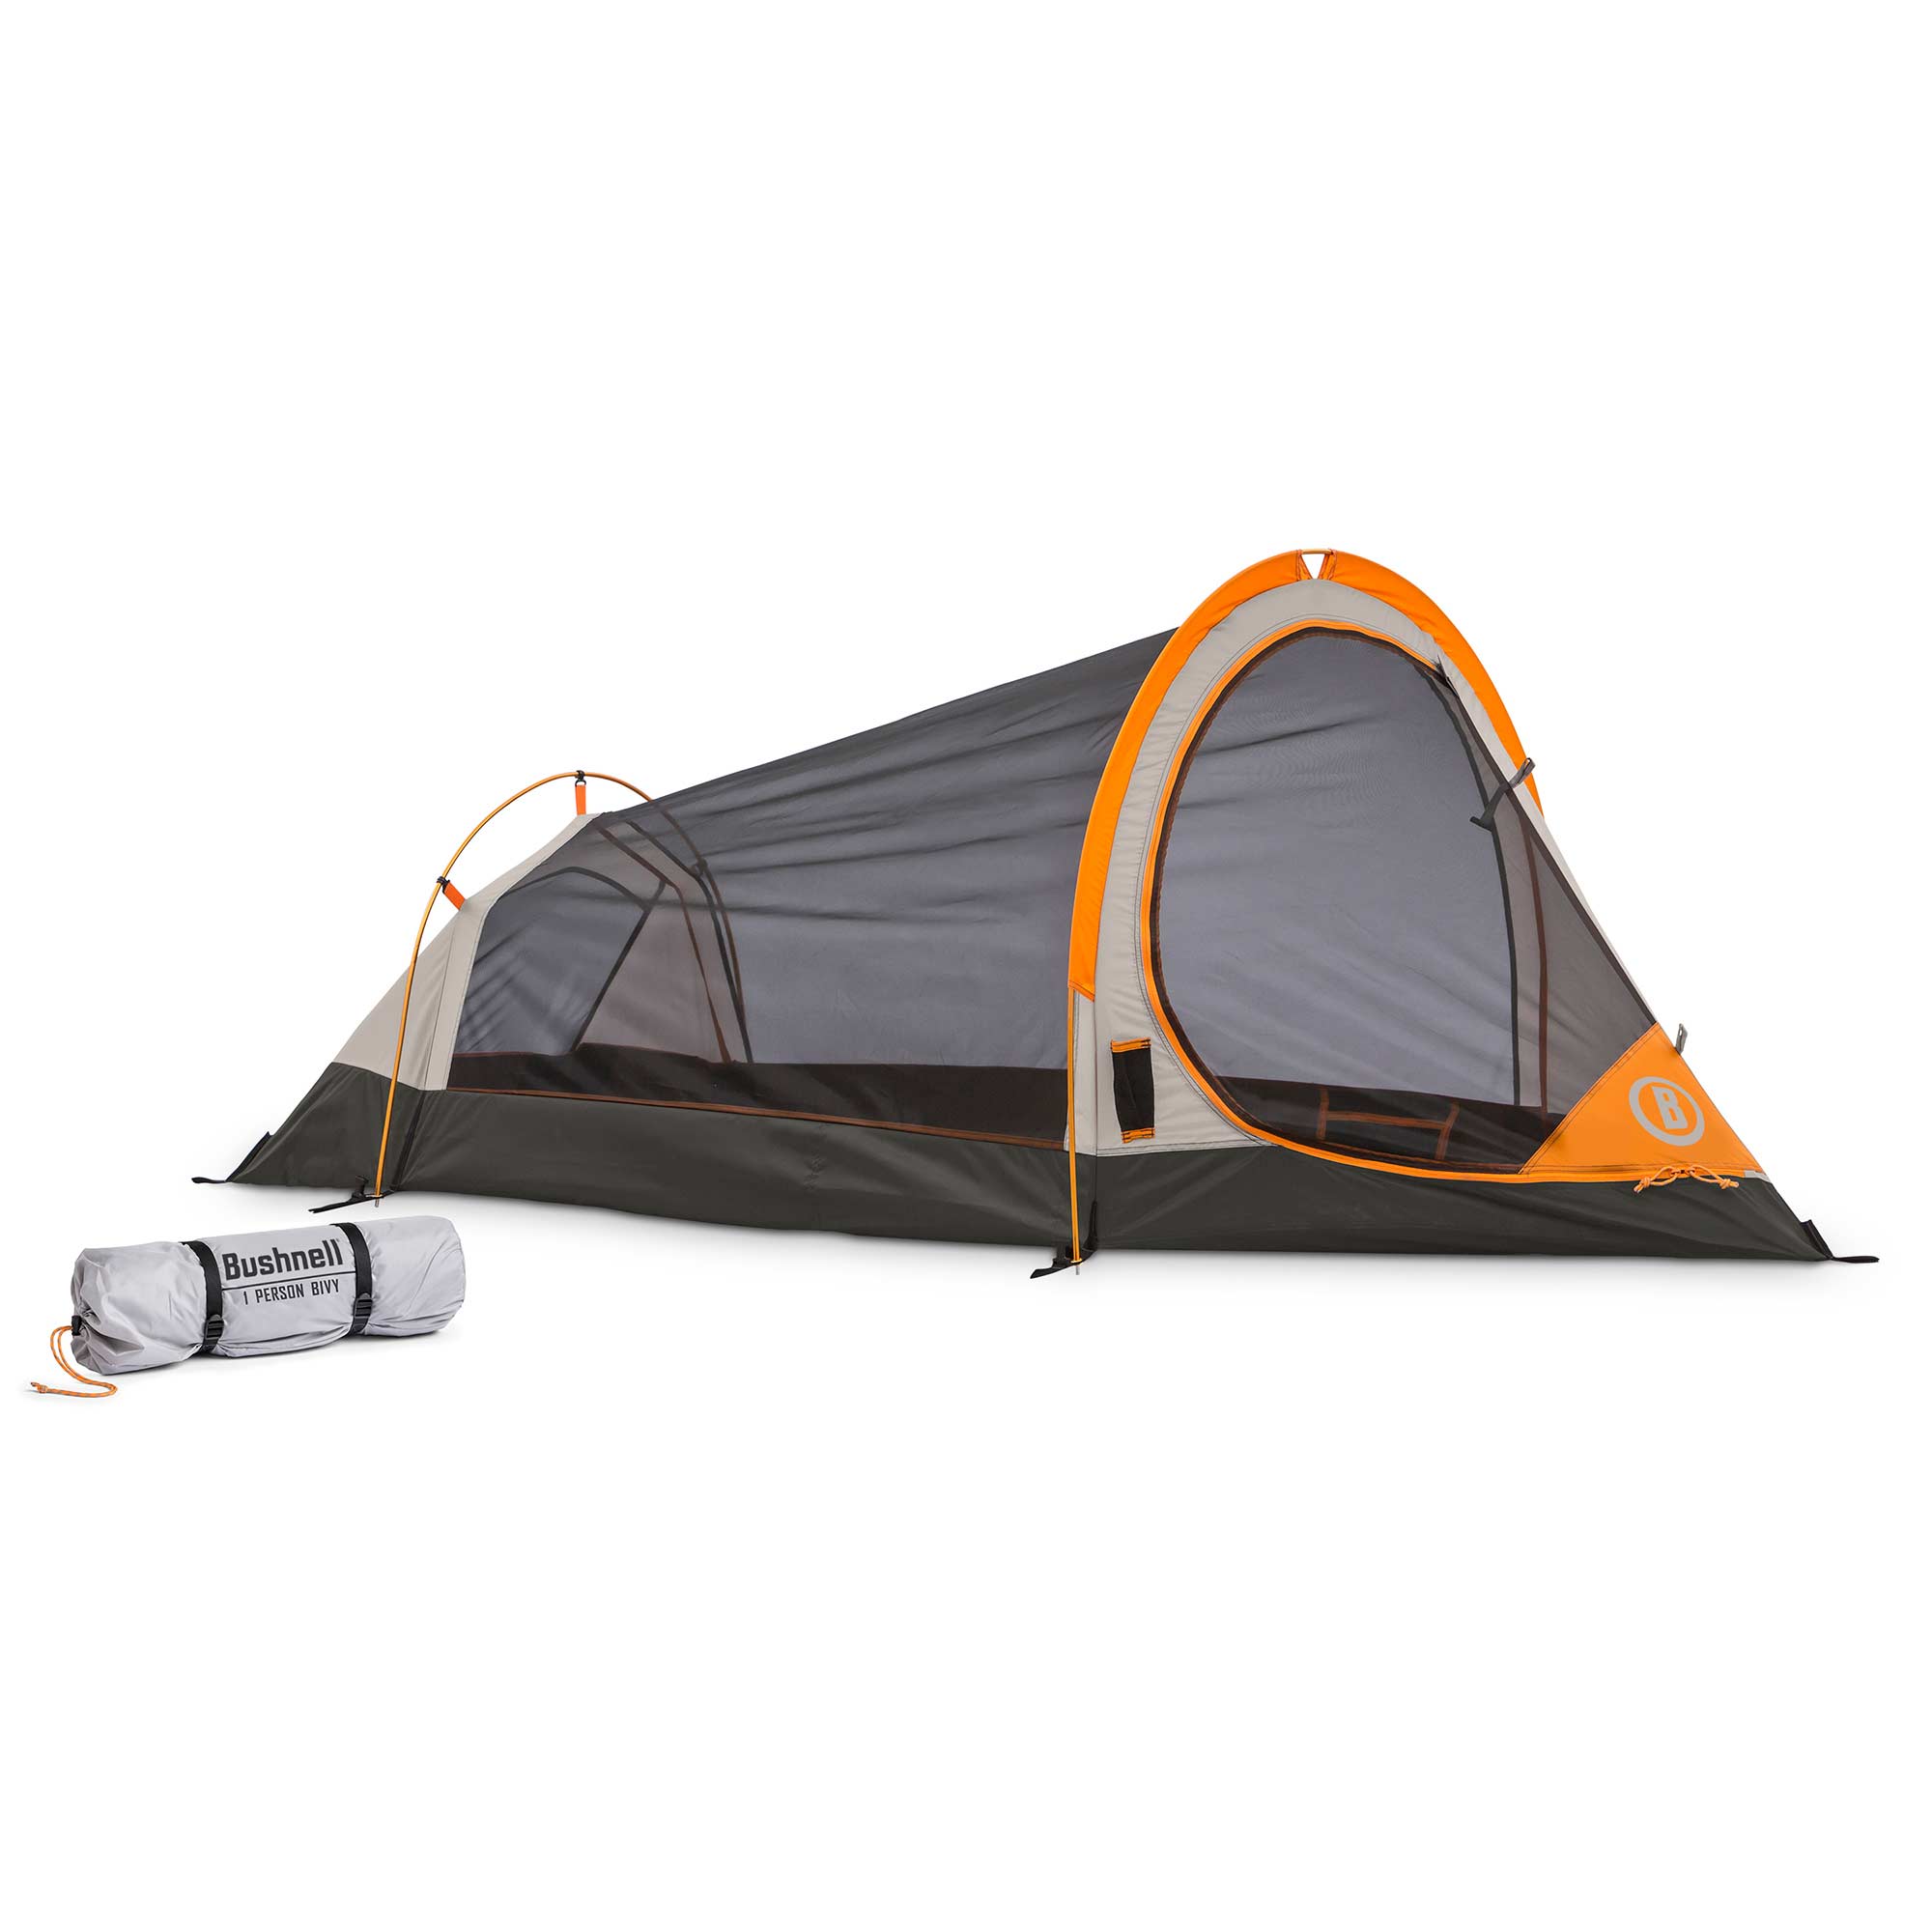 Single Person Backpacking Tent, 1 Person Tent Backpacking